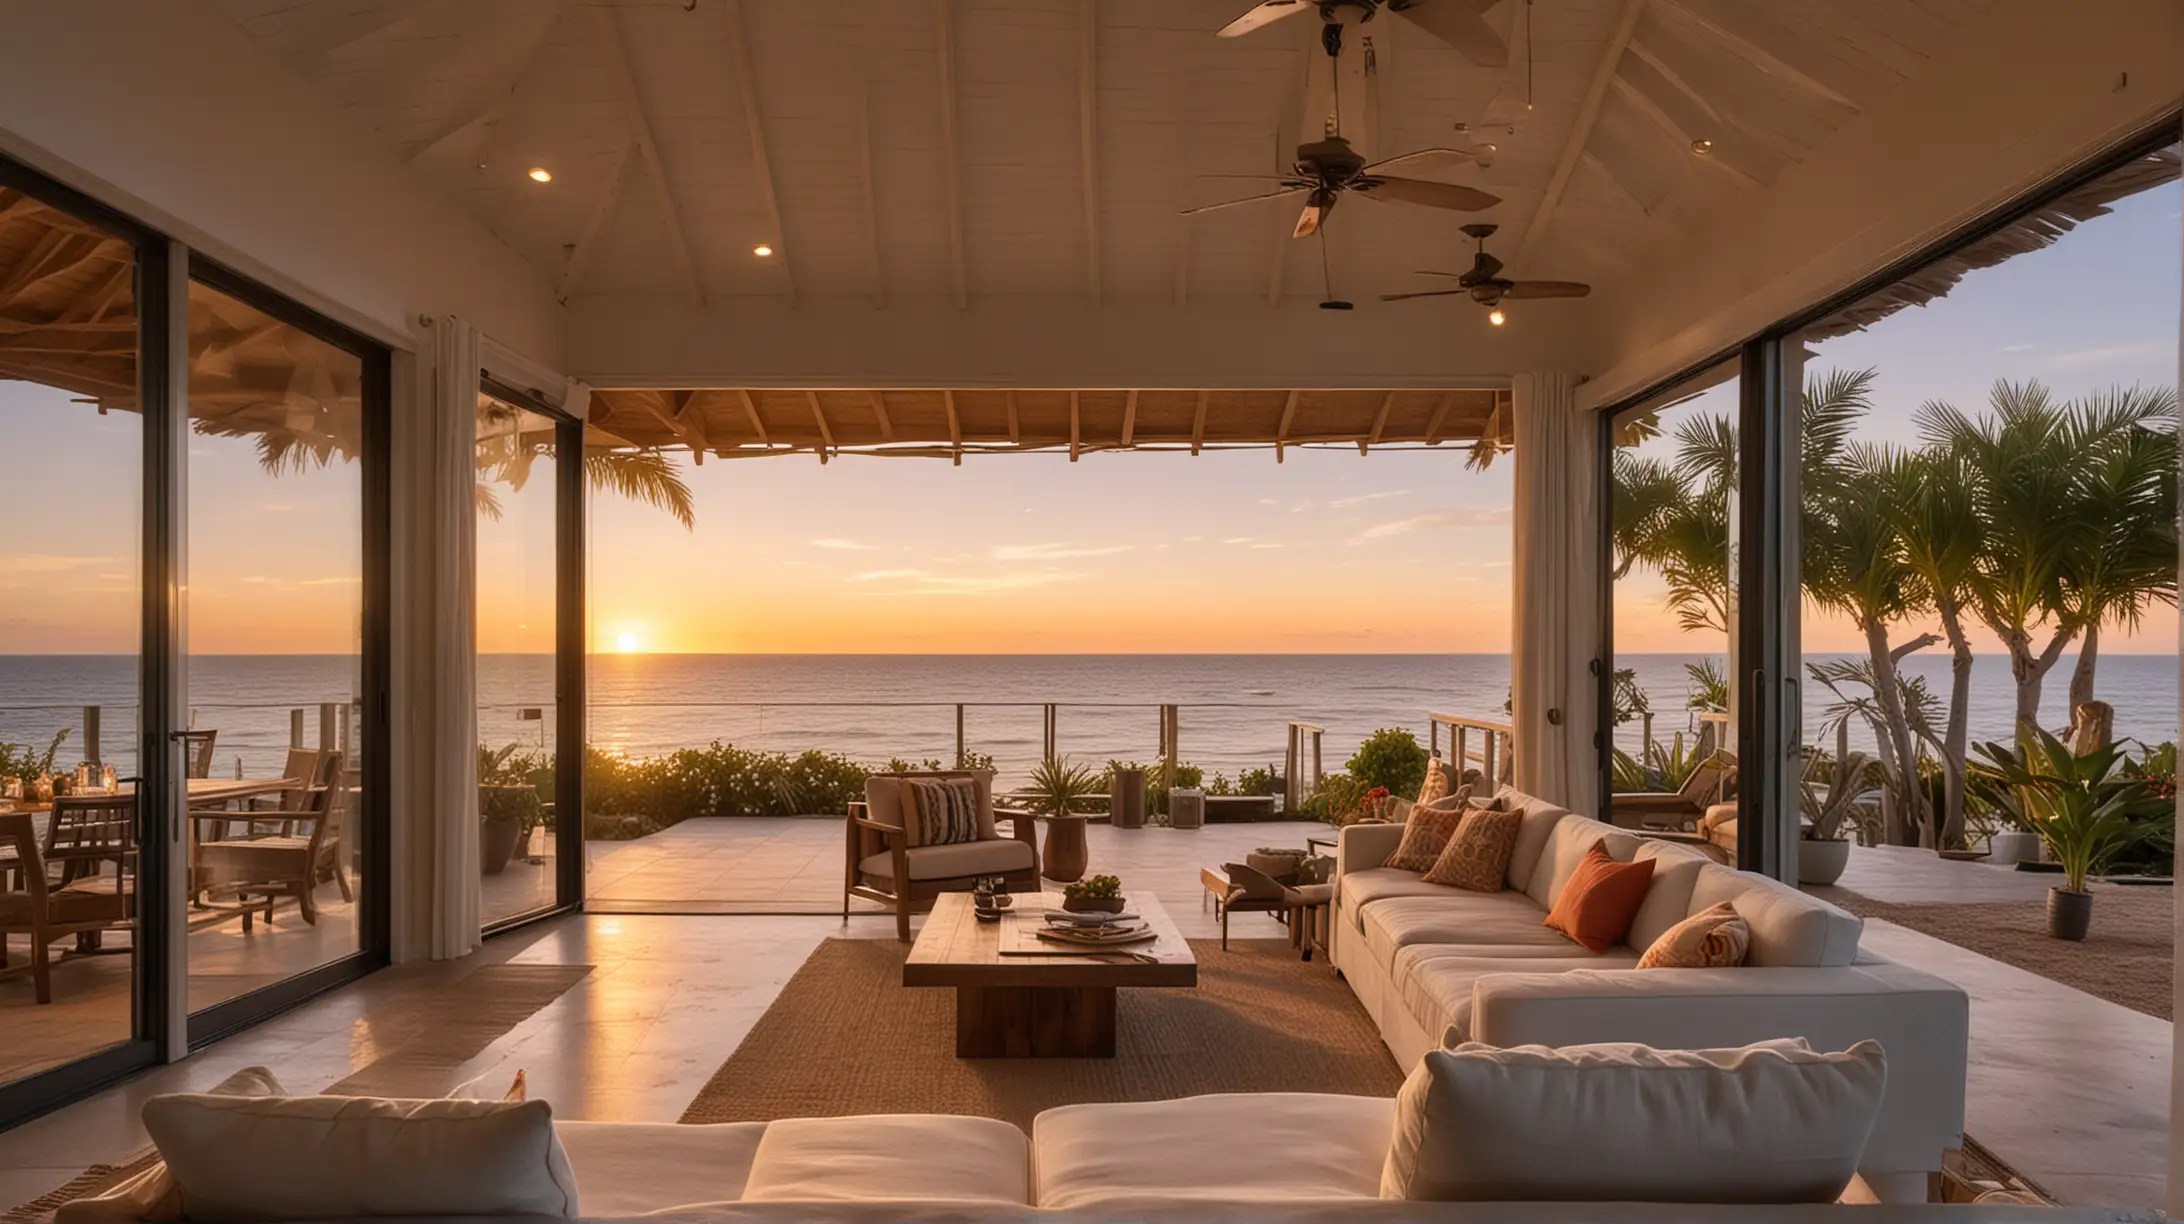 the interior living room area of an oceanfront vacation bungalow looking outward at the sunset with outdoor living spaces and soft lighting elements